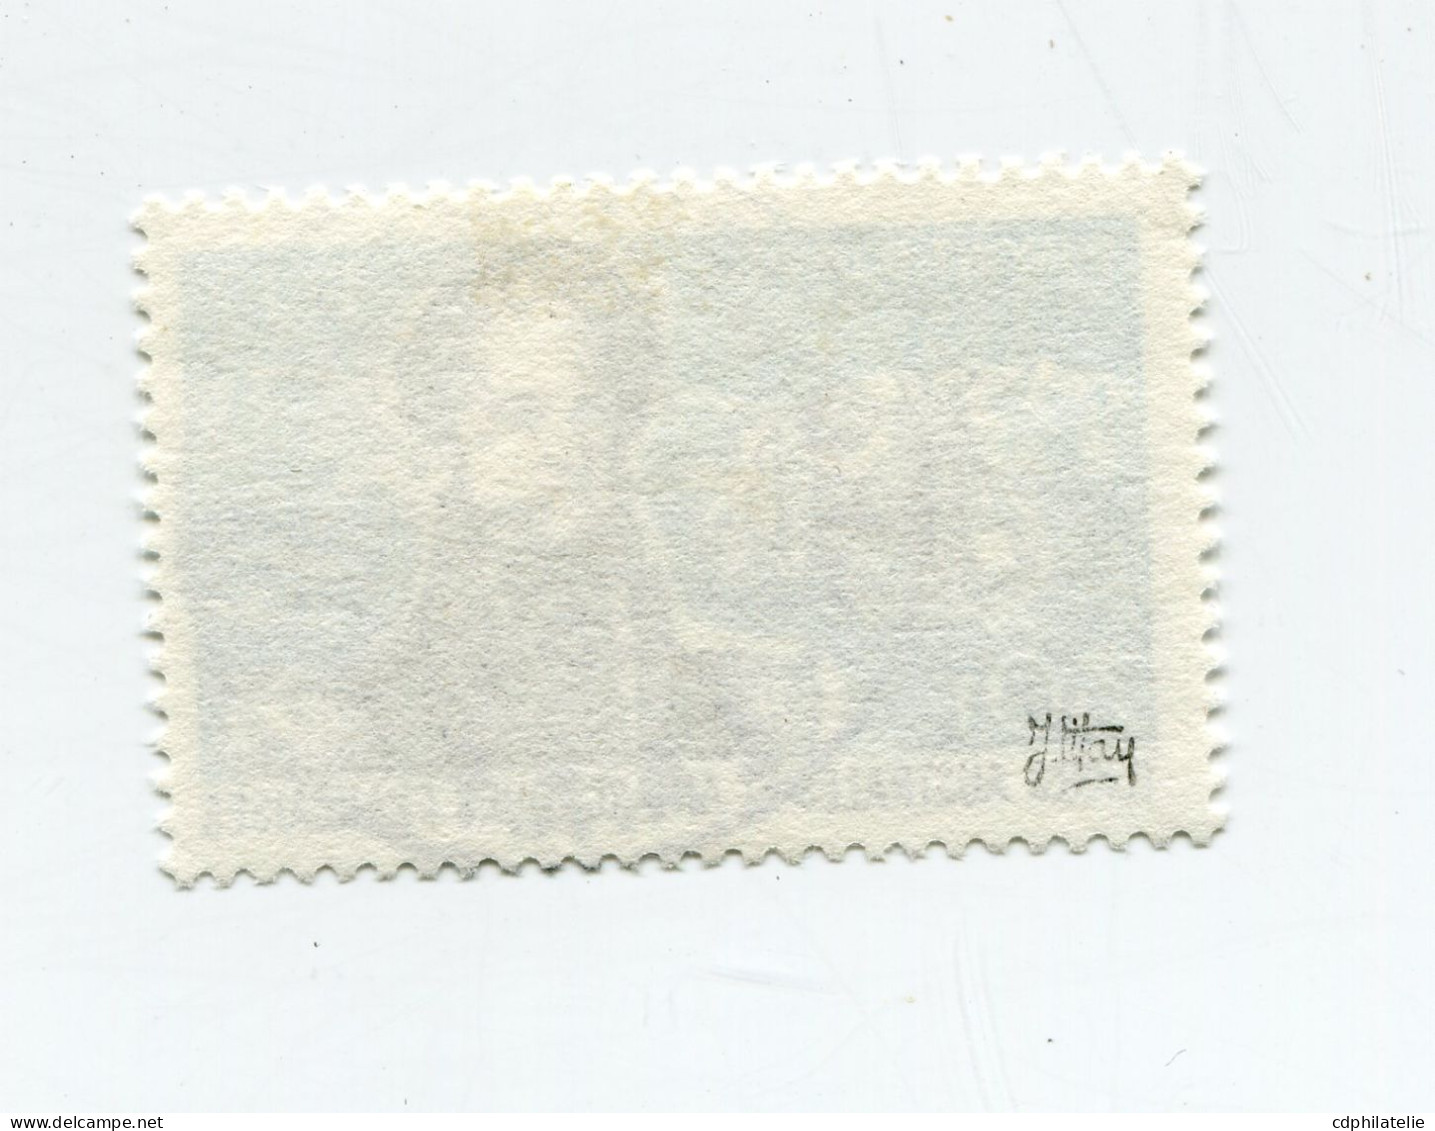 T. A.A. F. N°25 O AMIRAL DUMONT D'URVILLE - Used Stamps